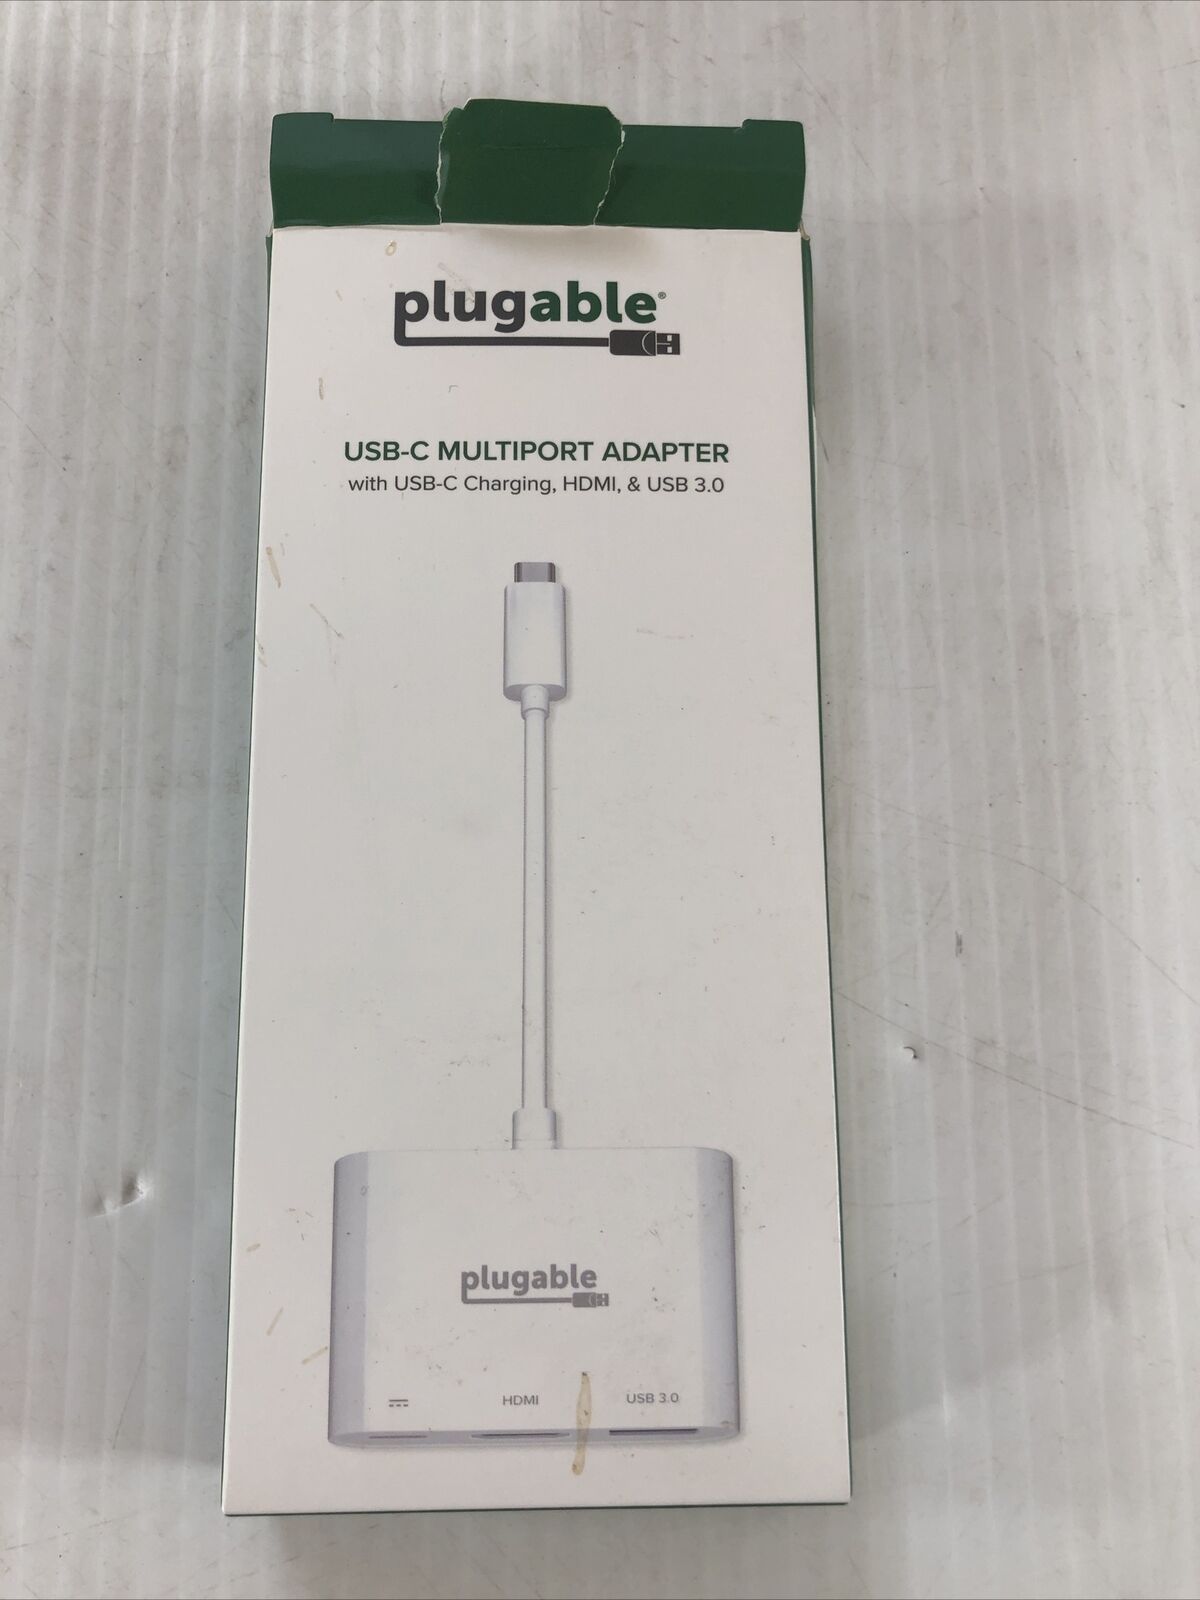 Plugable USB C to HDMI Multiport Adapter, 3-in-1 USB C Hub with 4K HDMI Output